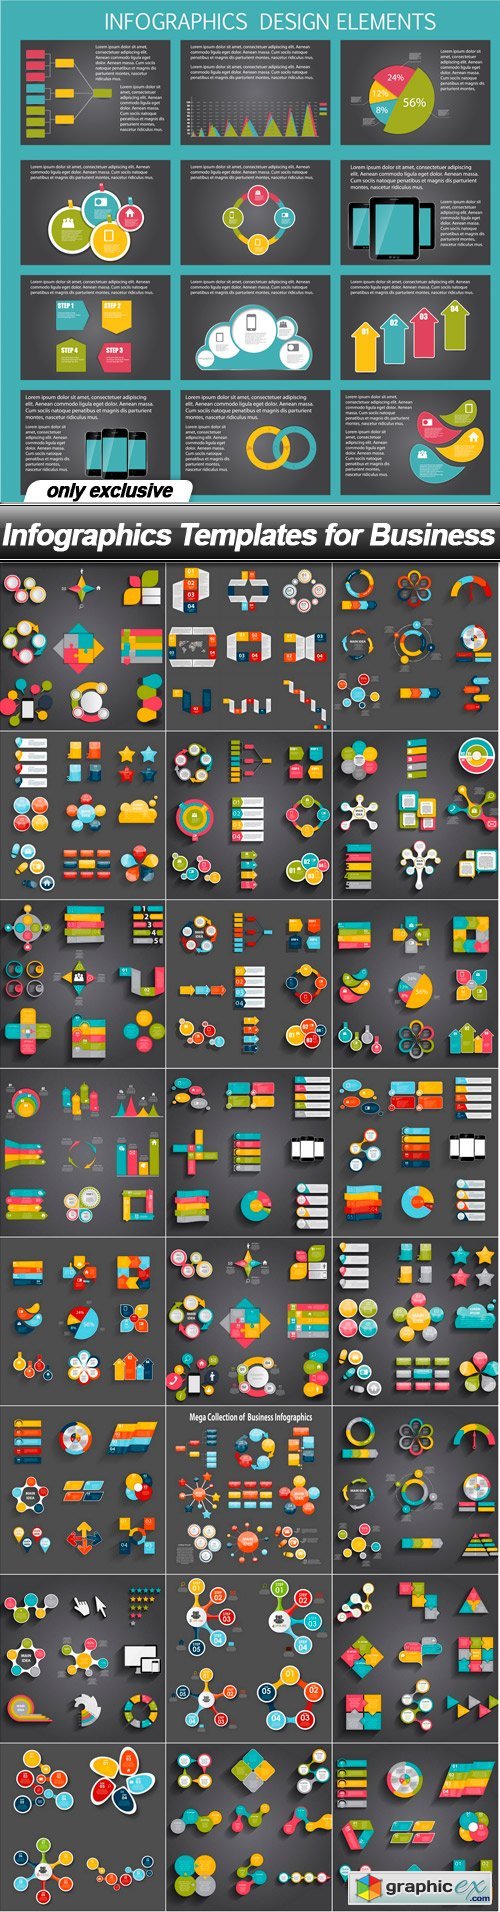 Infographics Templates for Business - 25 EPS